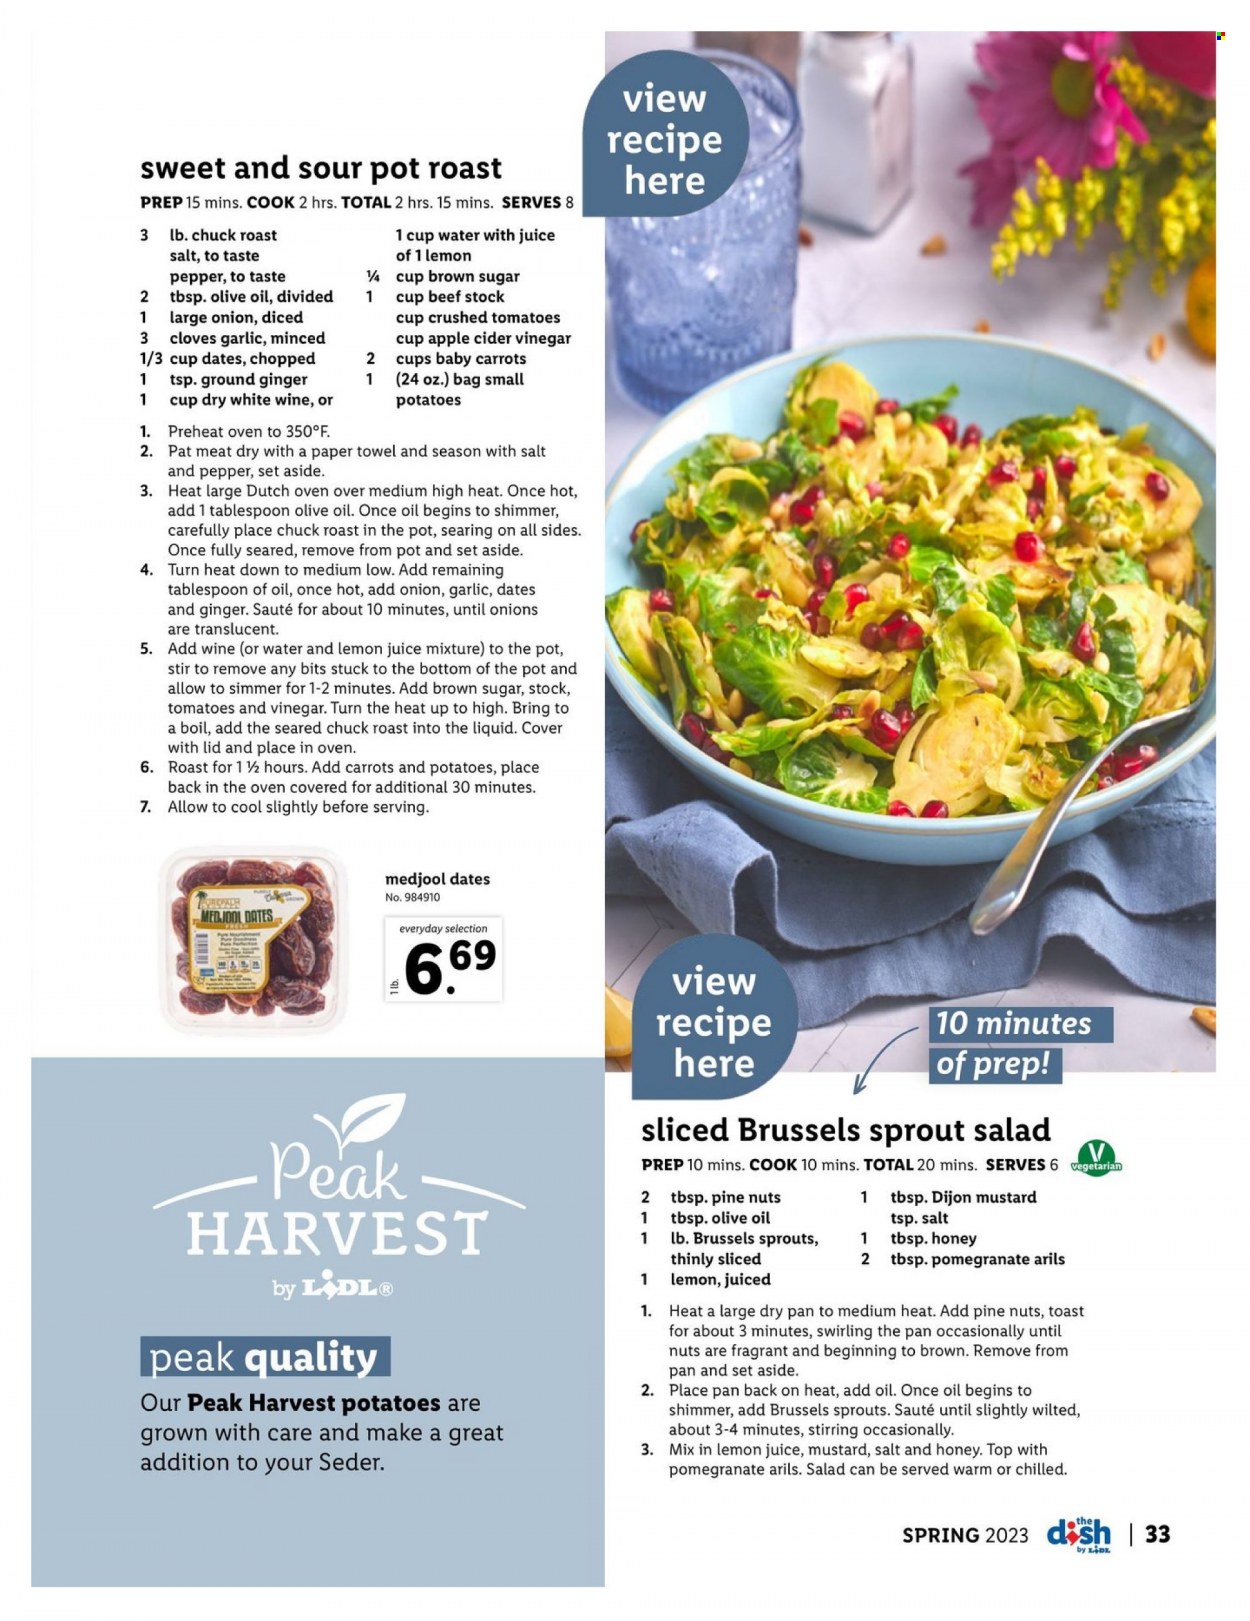 thumbnail - Lidl Flyer - 03/01/2023 - 04/25/2023 - Sales products - carrots, garlic, ginger, onion, brussel sprouts, roast, cane sugar, crushed tomatoes, ground ginger, pepper, cloves, mustard, apple cider vinegar, vinegar, olive oil, honey, dried dates, water, lemon juice, wine, beef meat, chuck roast, pot, pan, cast iron dutch oven, pomegranate. Page 33.